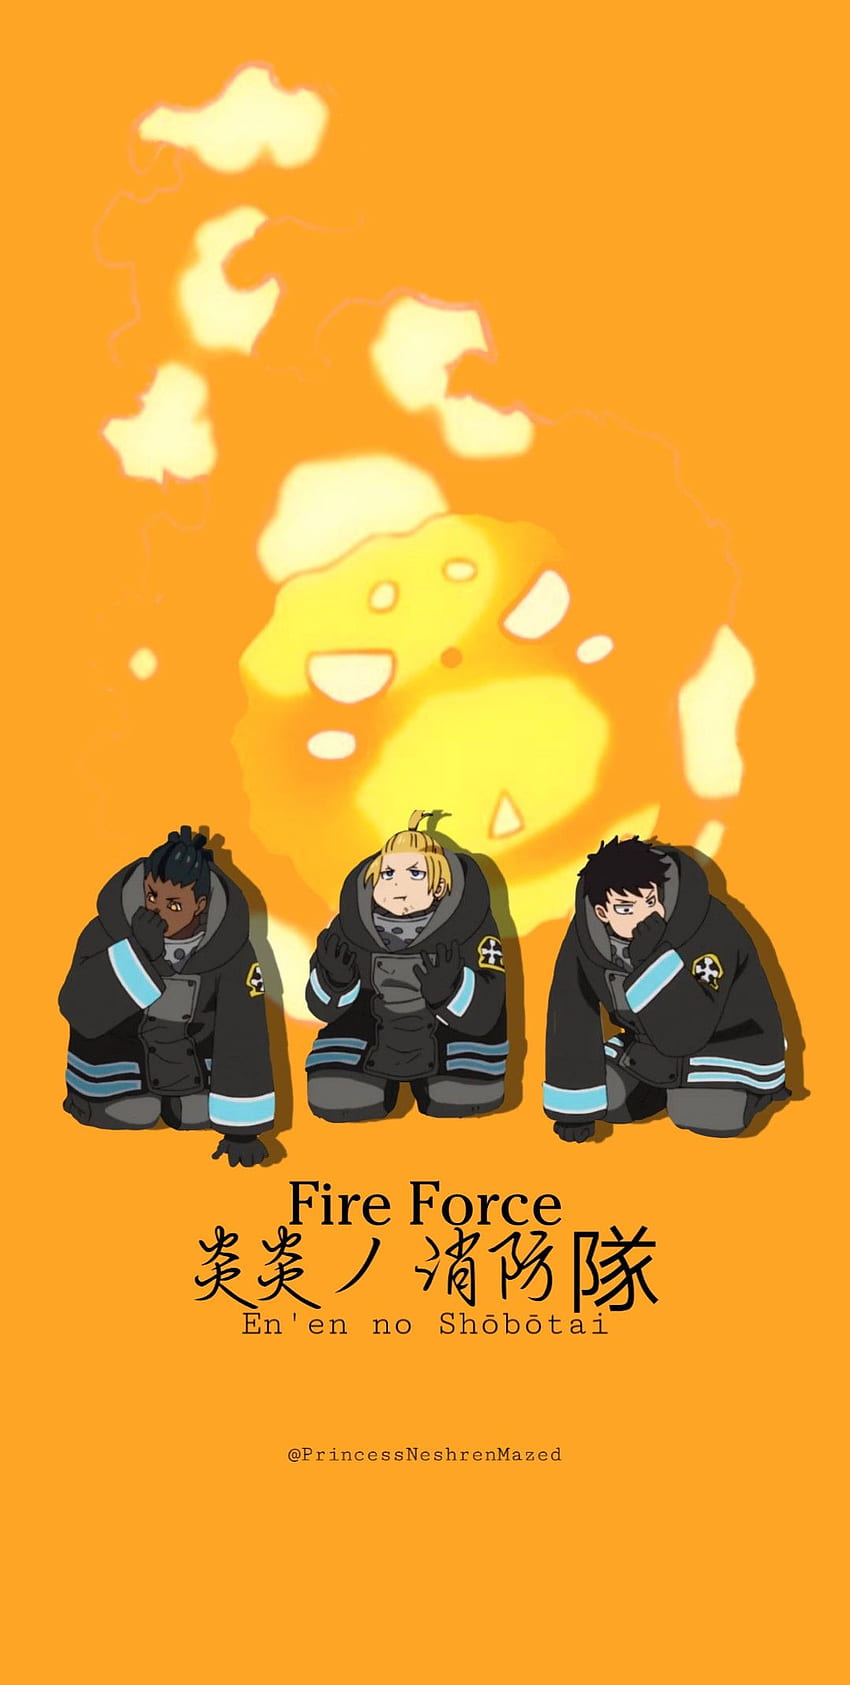 Details 83+ fire force anime latest - in.coedo.com.vn